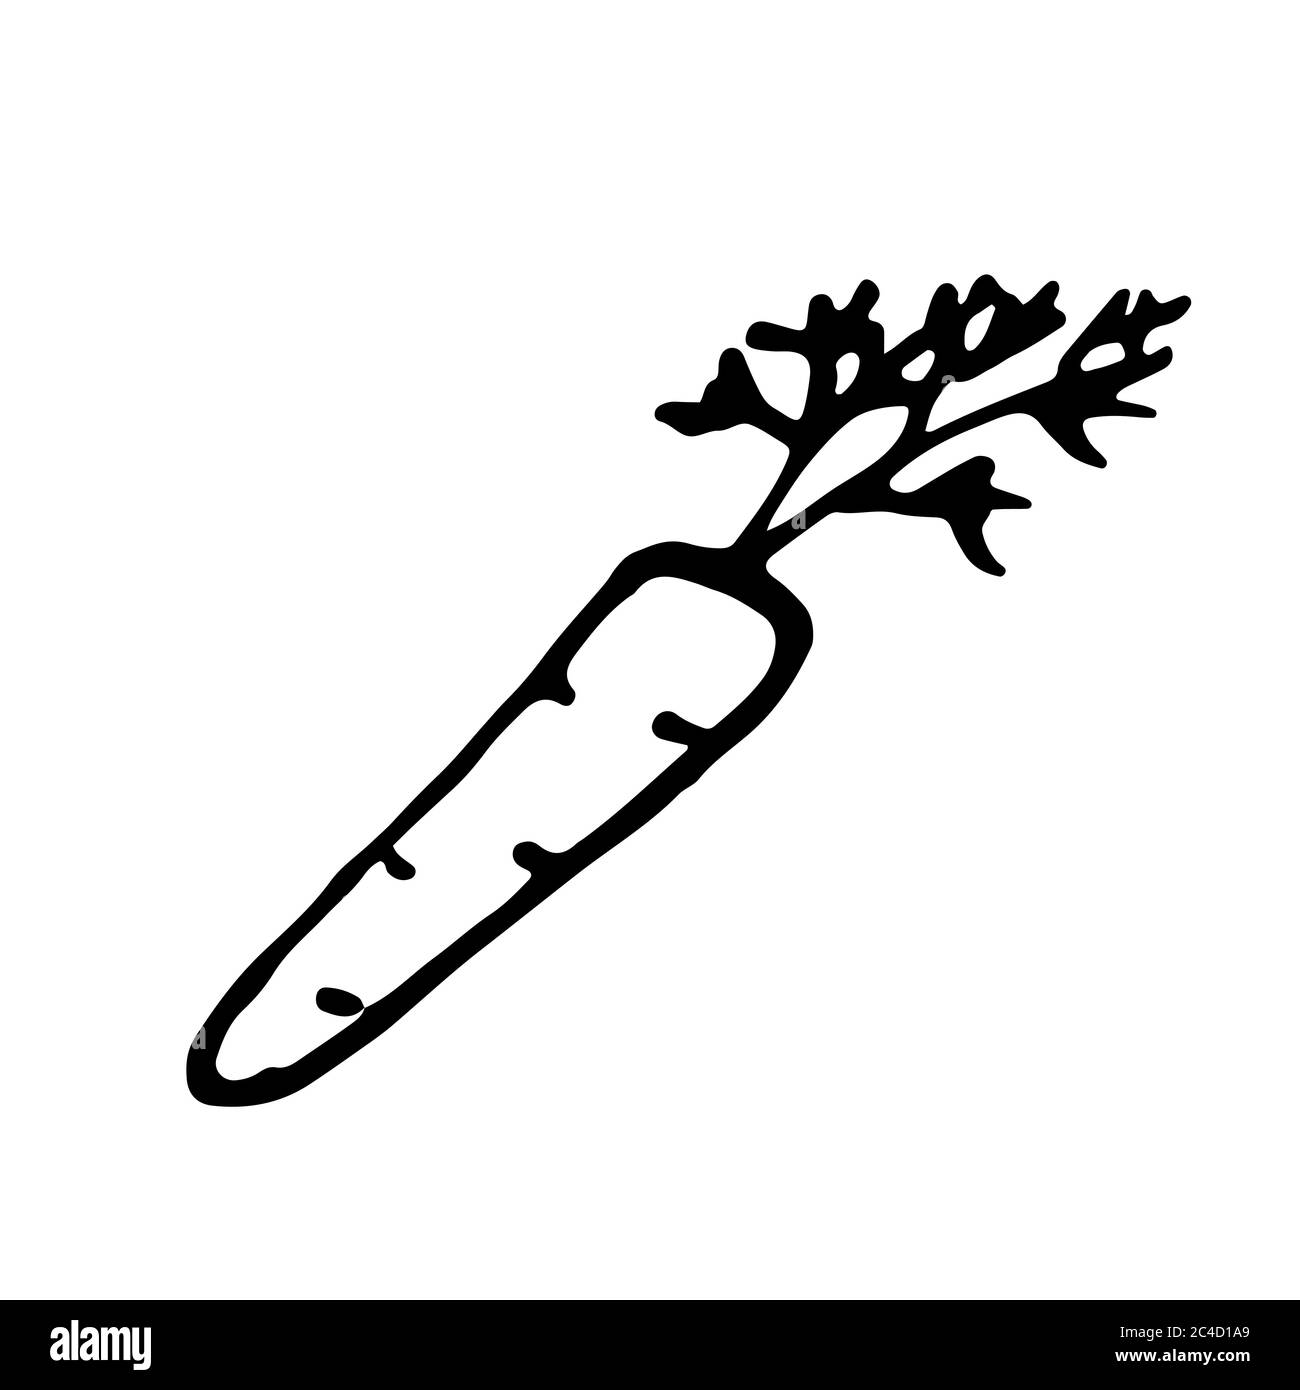 Carrot. Hand drawn outline doodle icon. Transparent isolated on white background. Vector illustration for greeting cards, posters, patches, prints Stock Vector